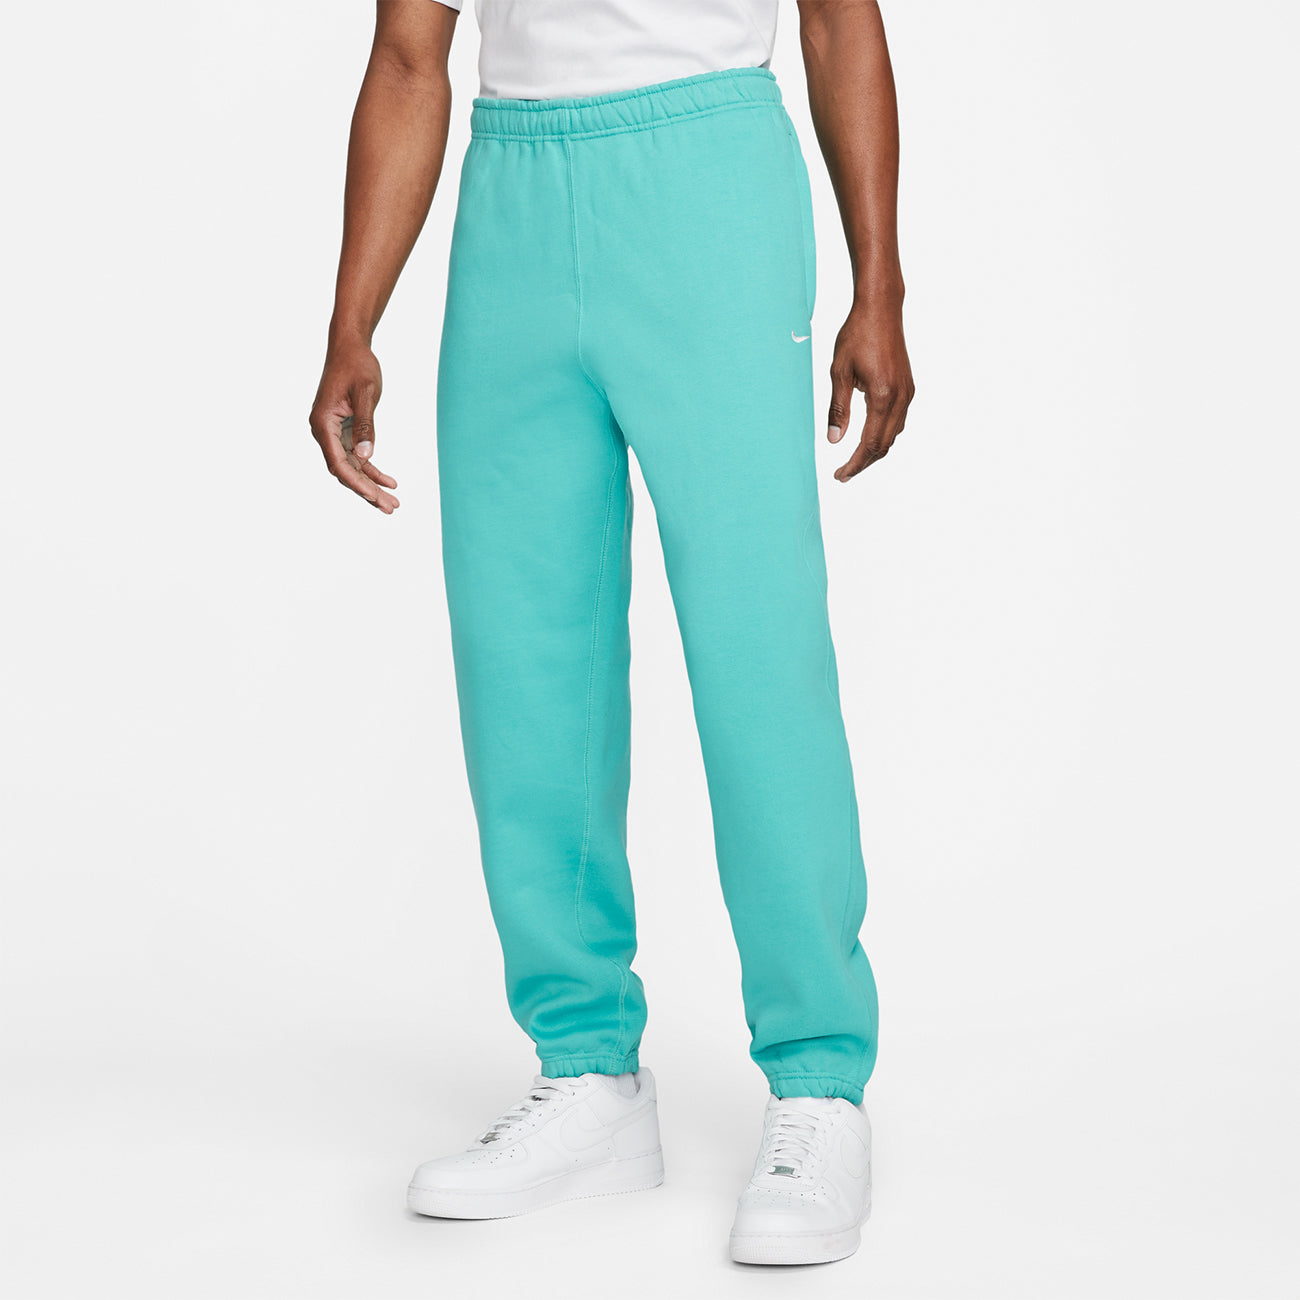 Soloswoosh Pant - Washed Teal/White